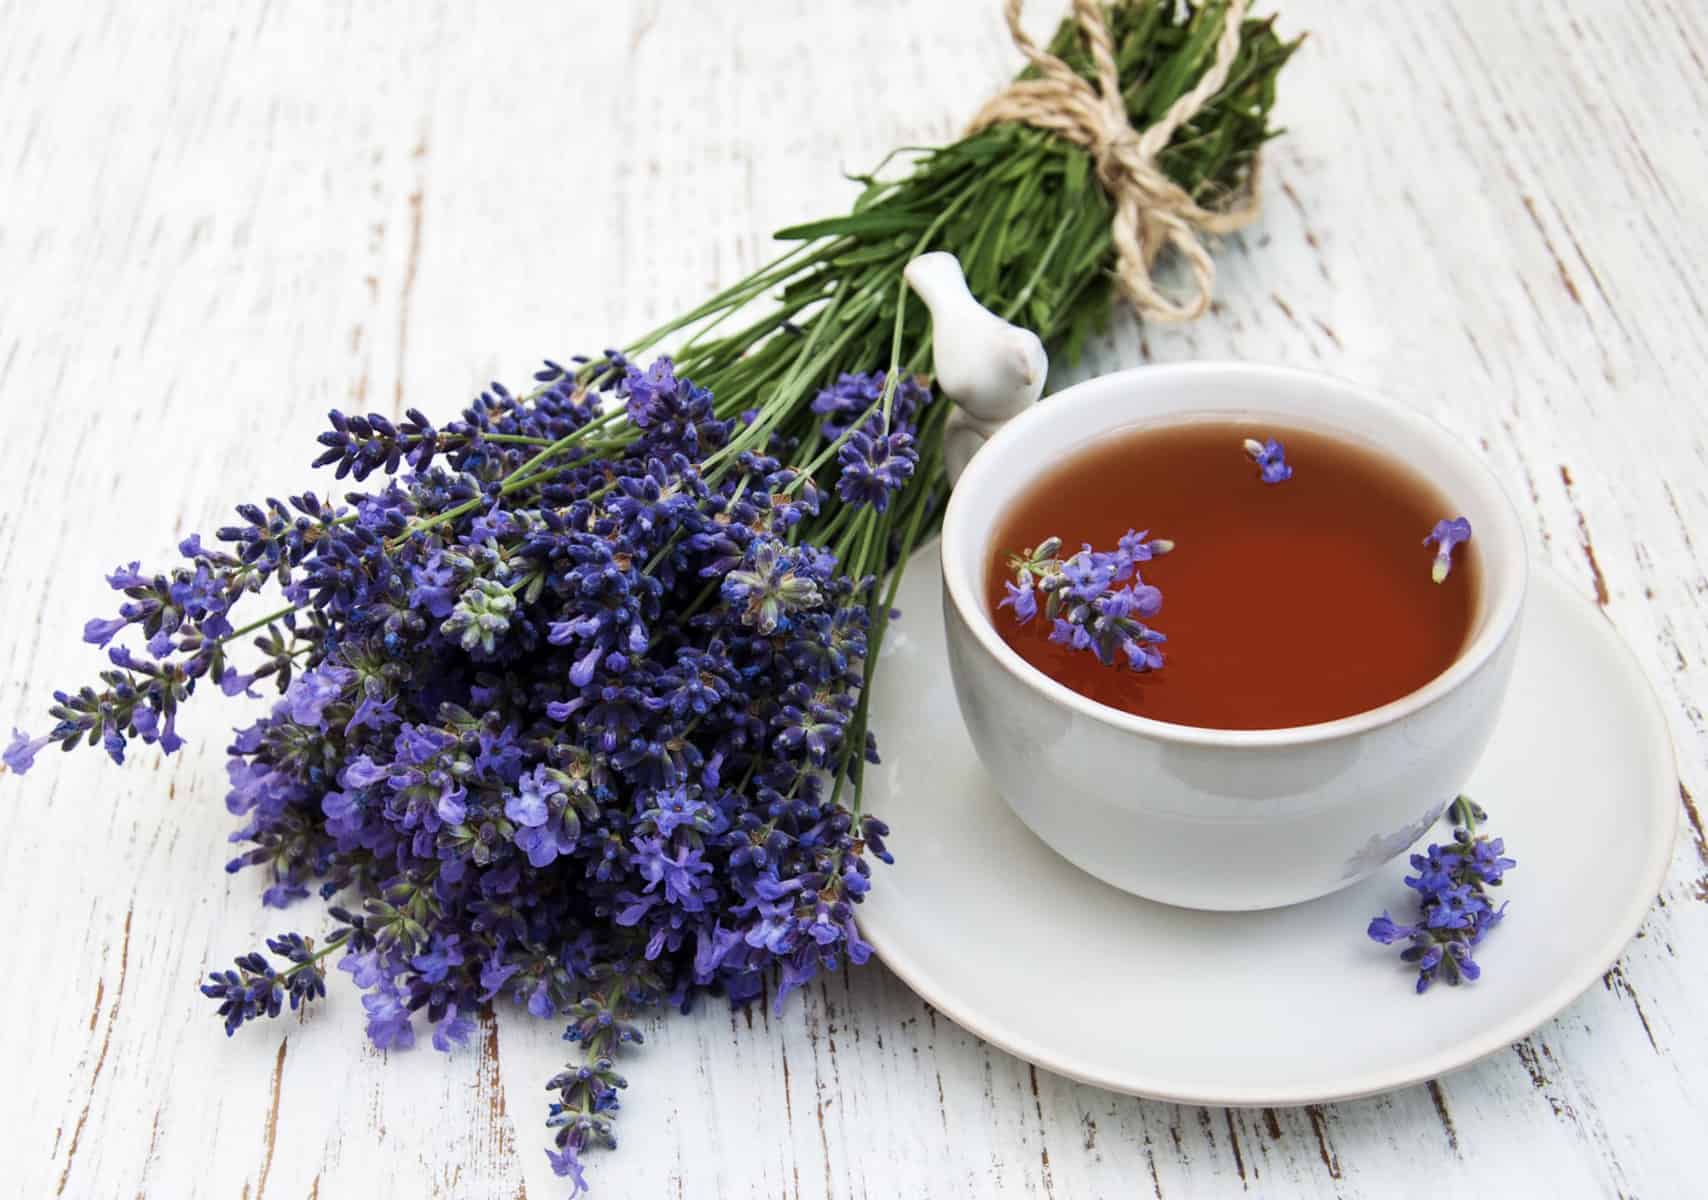 Lavender Tea Benefits that Give Your Health a Lift